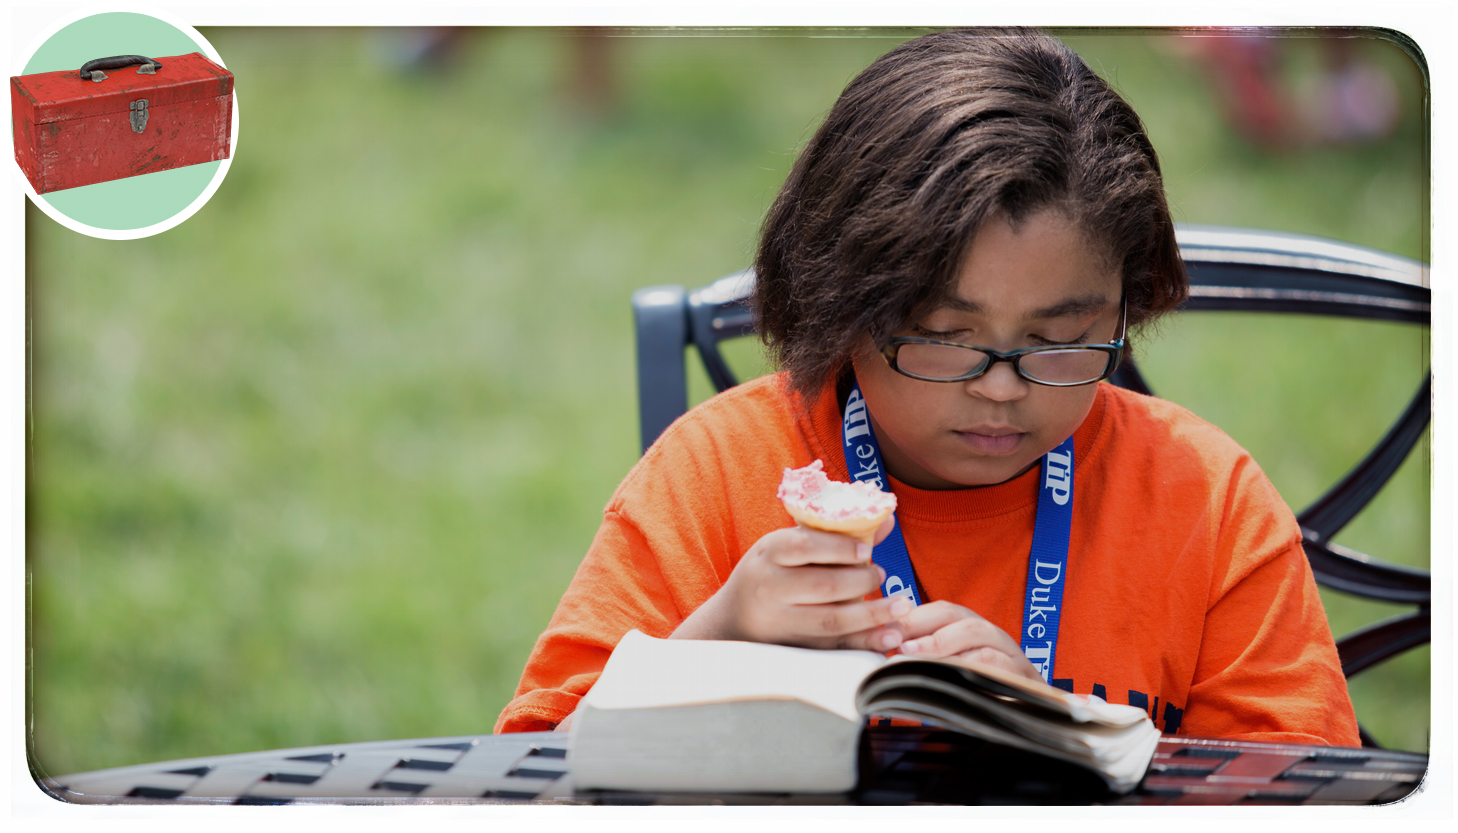 A girl reading a book outside with an ice cream cone in her hands